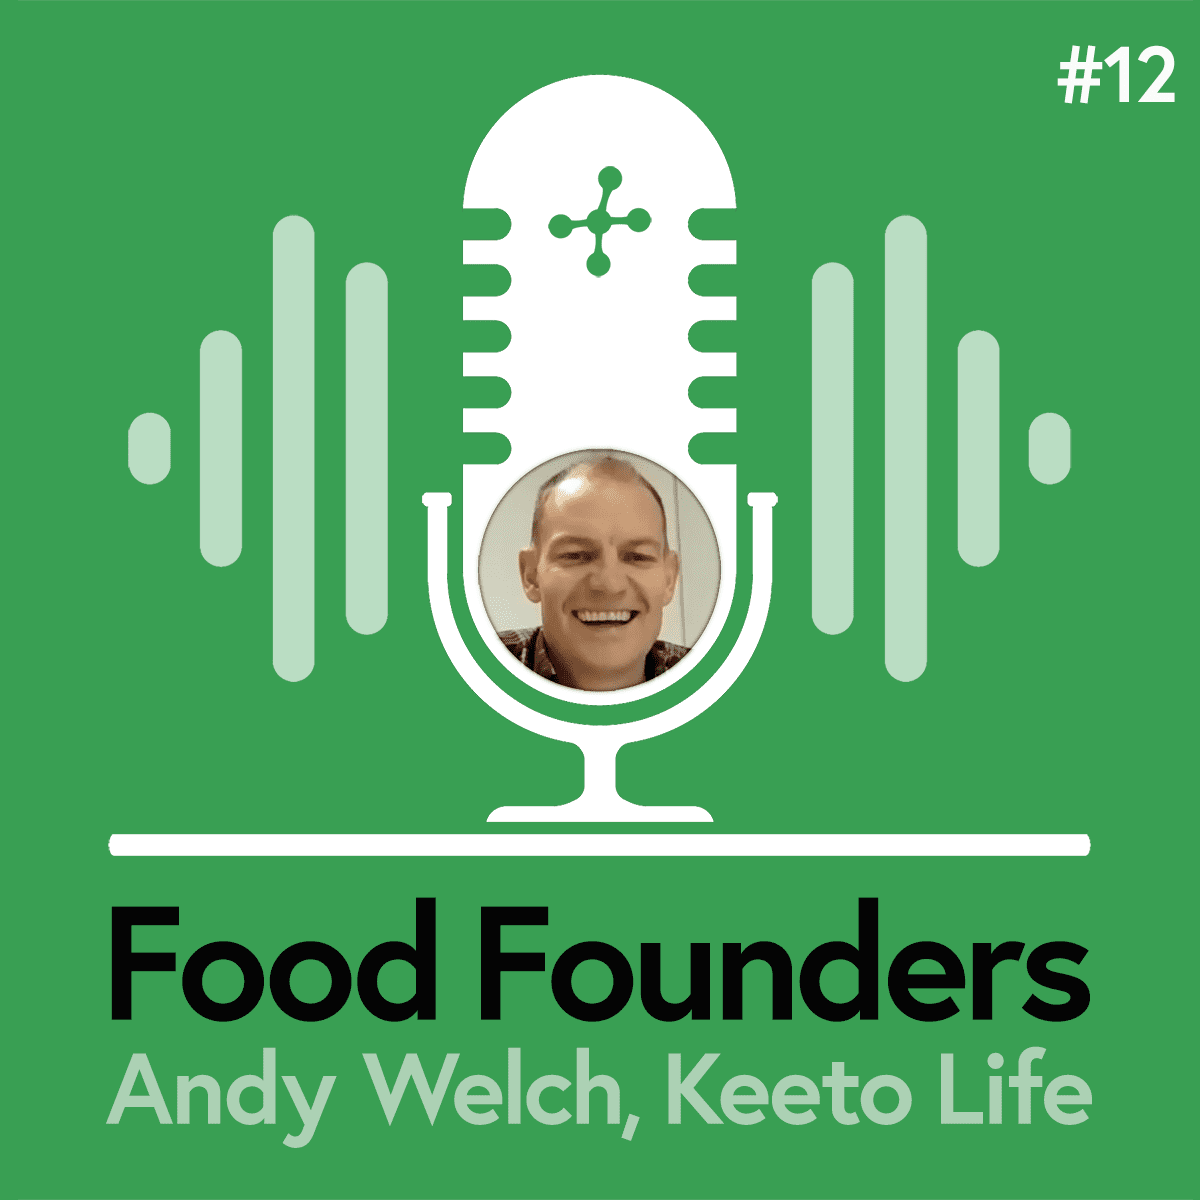 Andy Welch, Keeto Life, Seriously Low Carb Foods